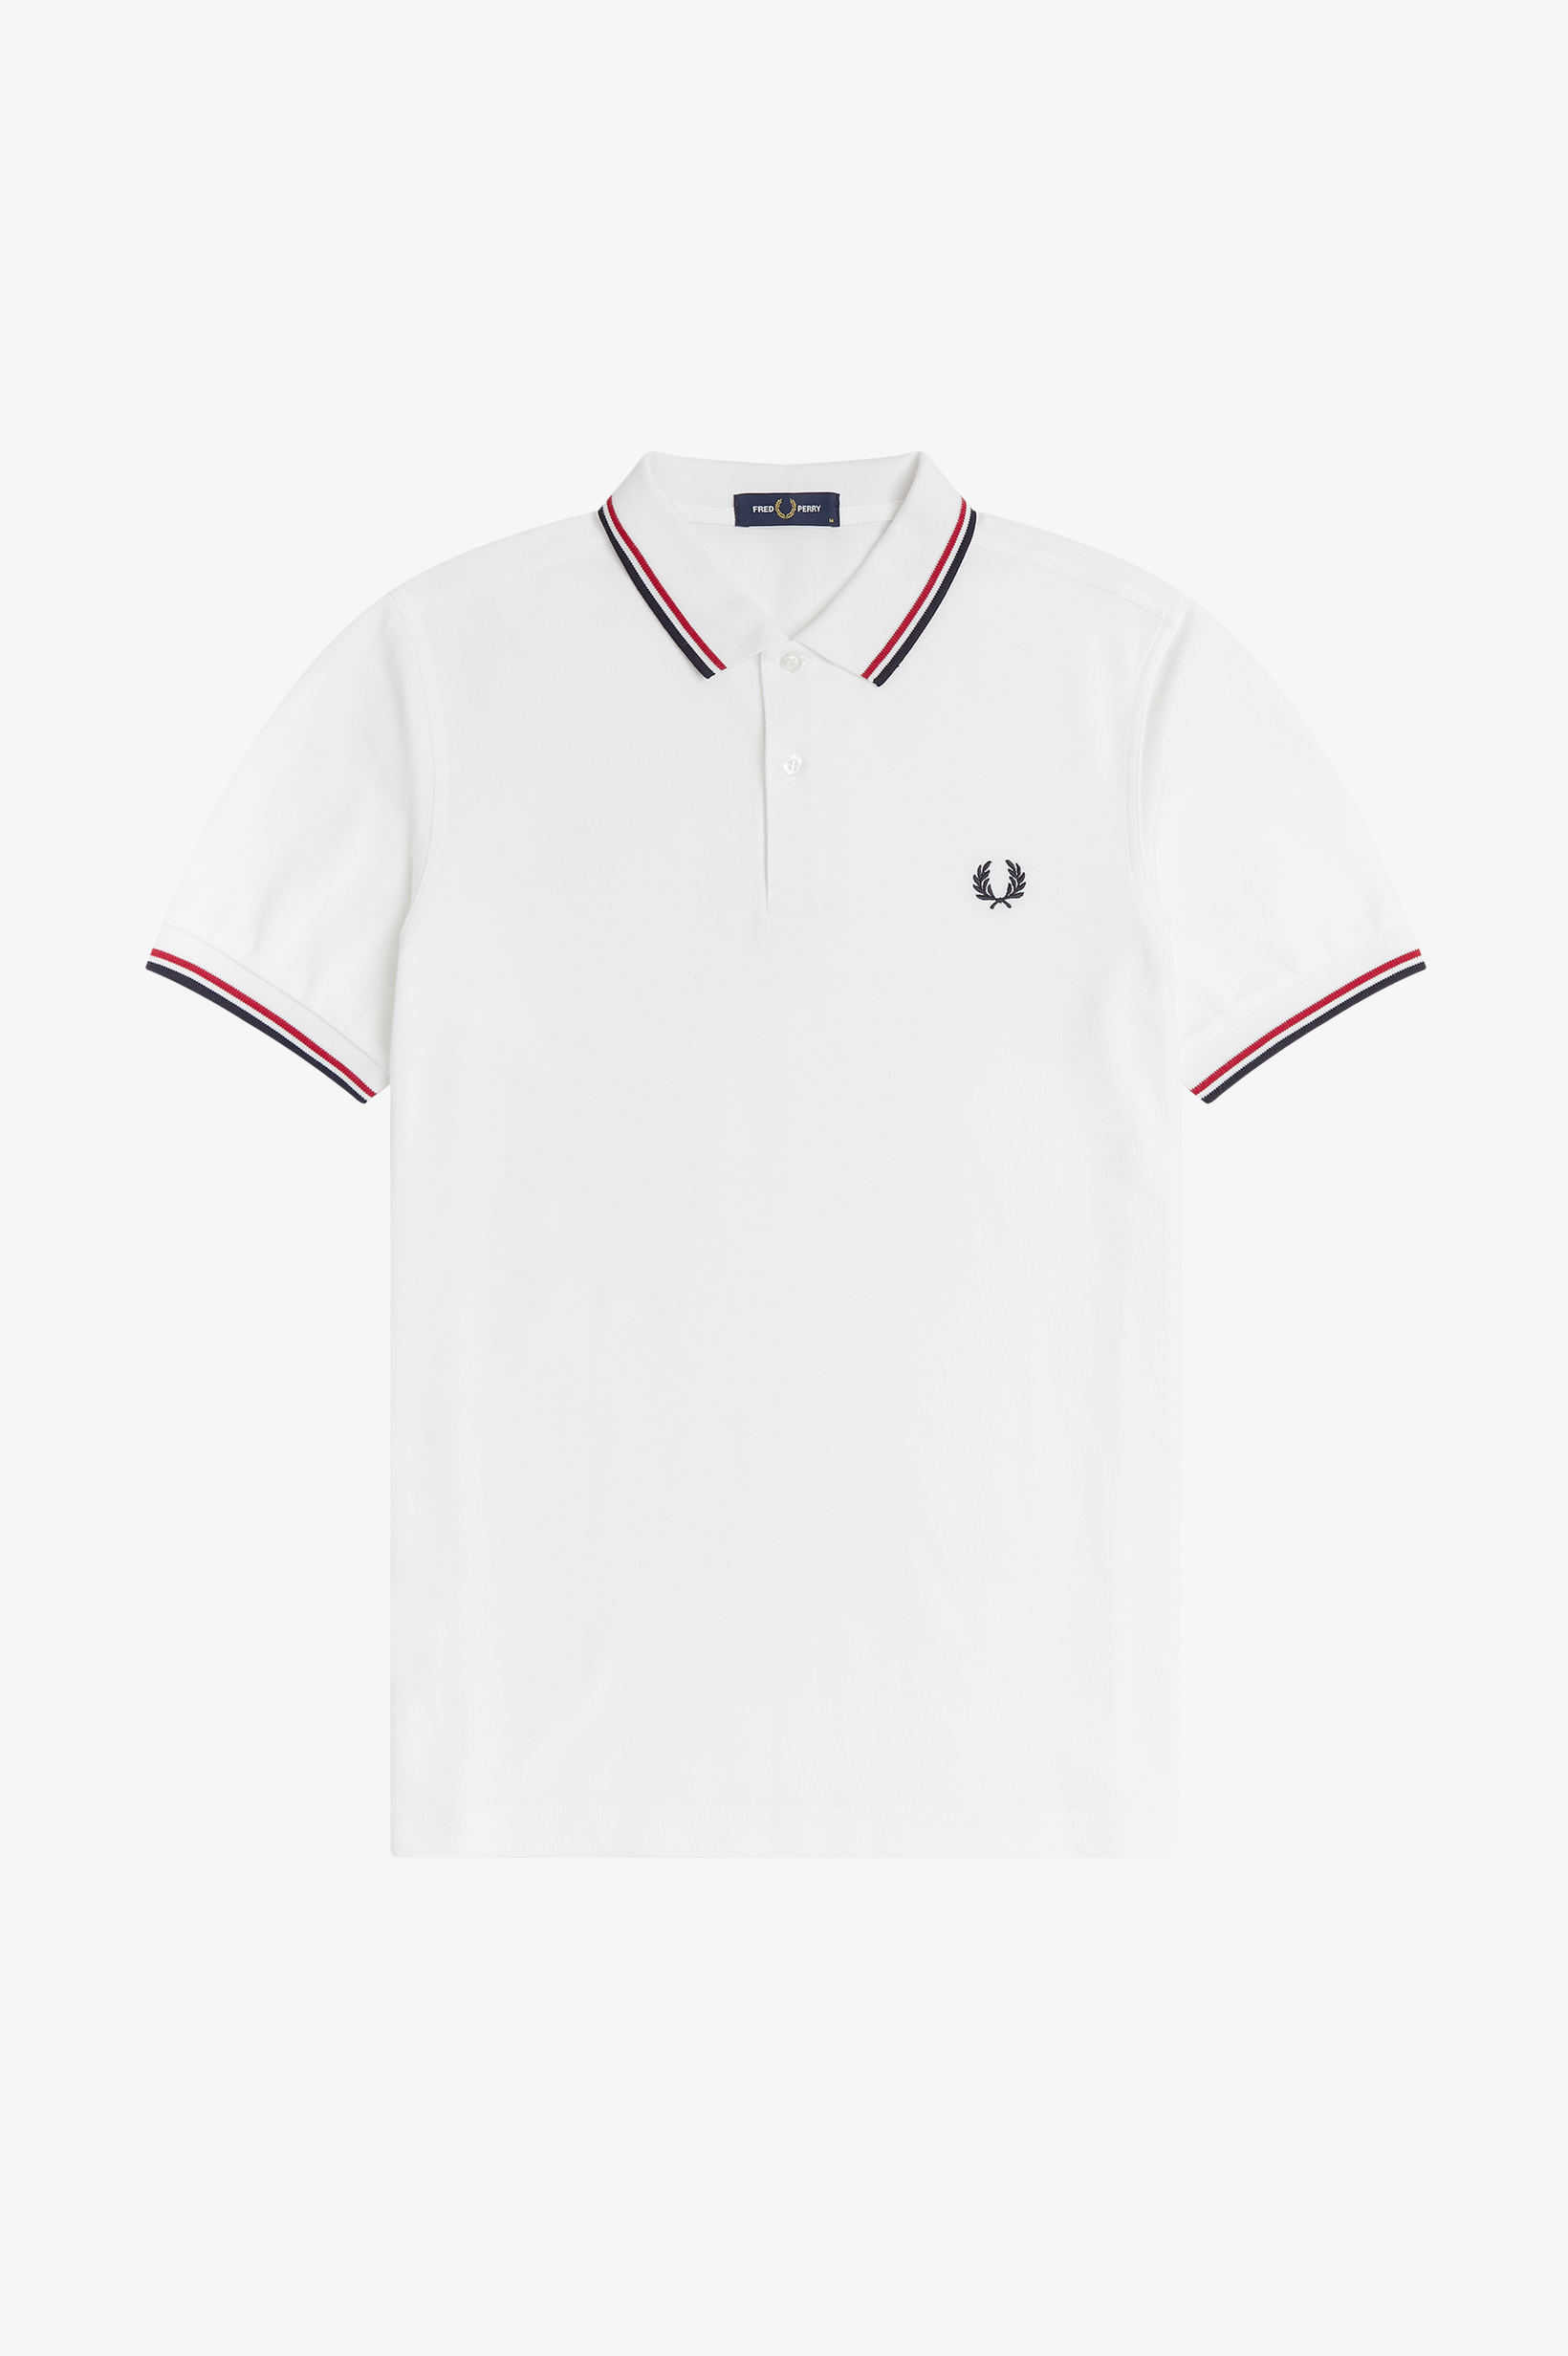 Fred Perry - TWIN TIPPED POLO SHIRT - White/Bright Red/Navy